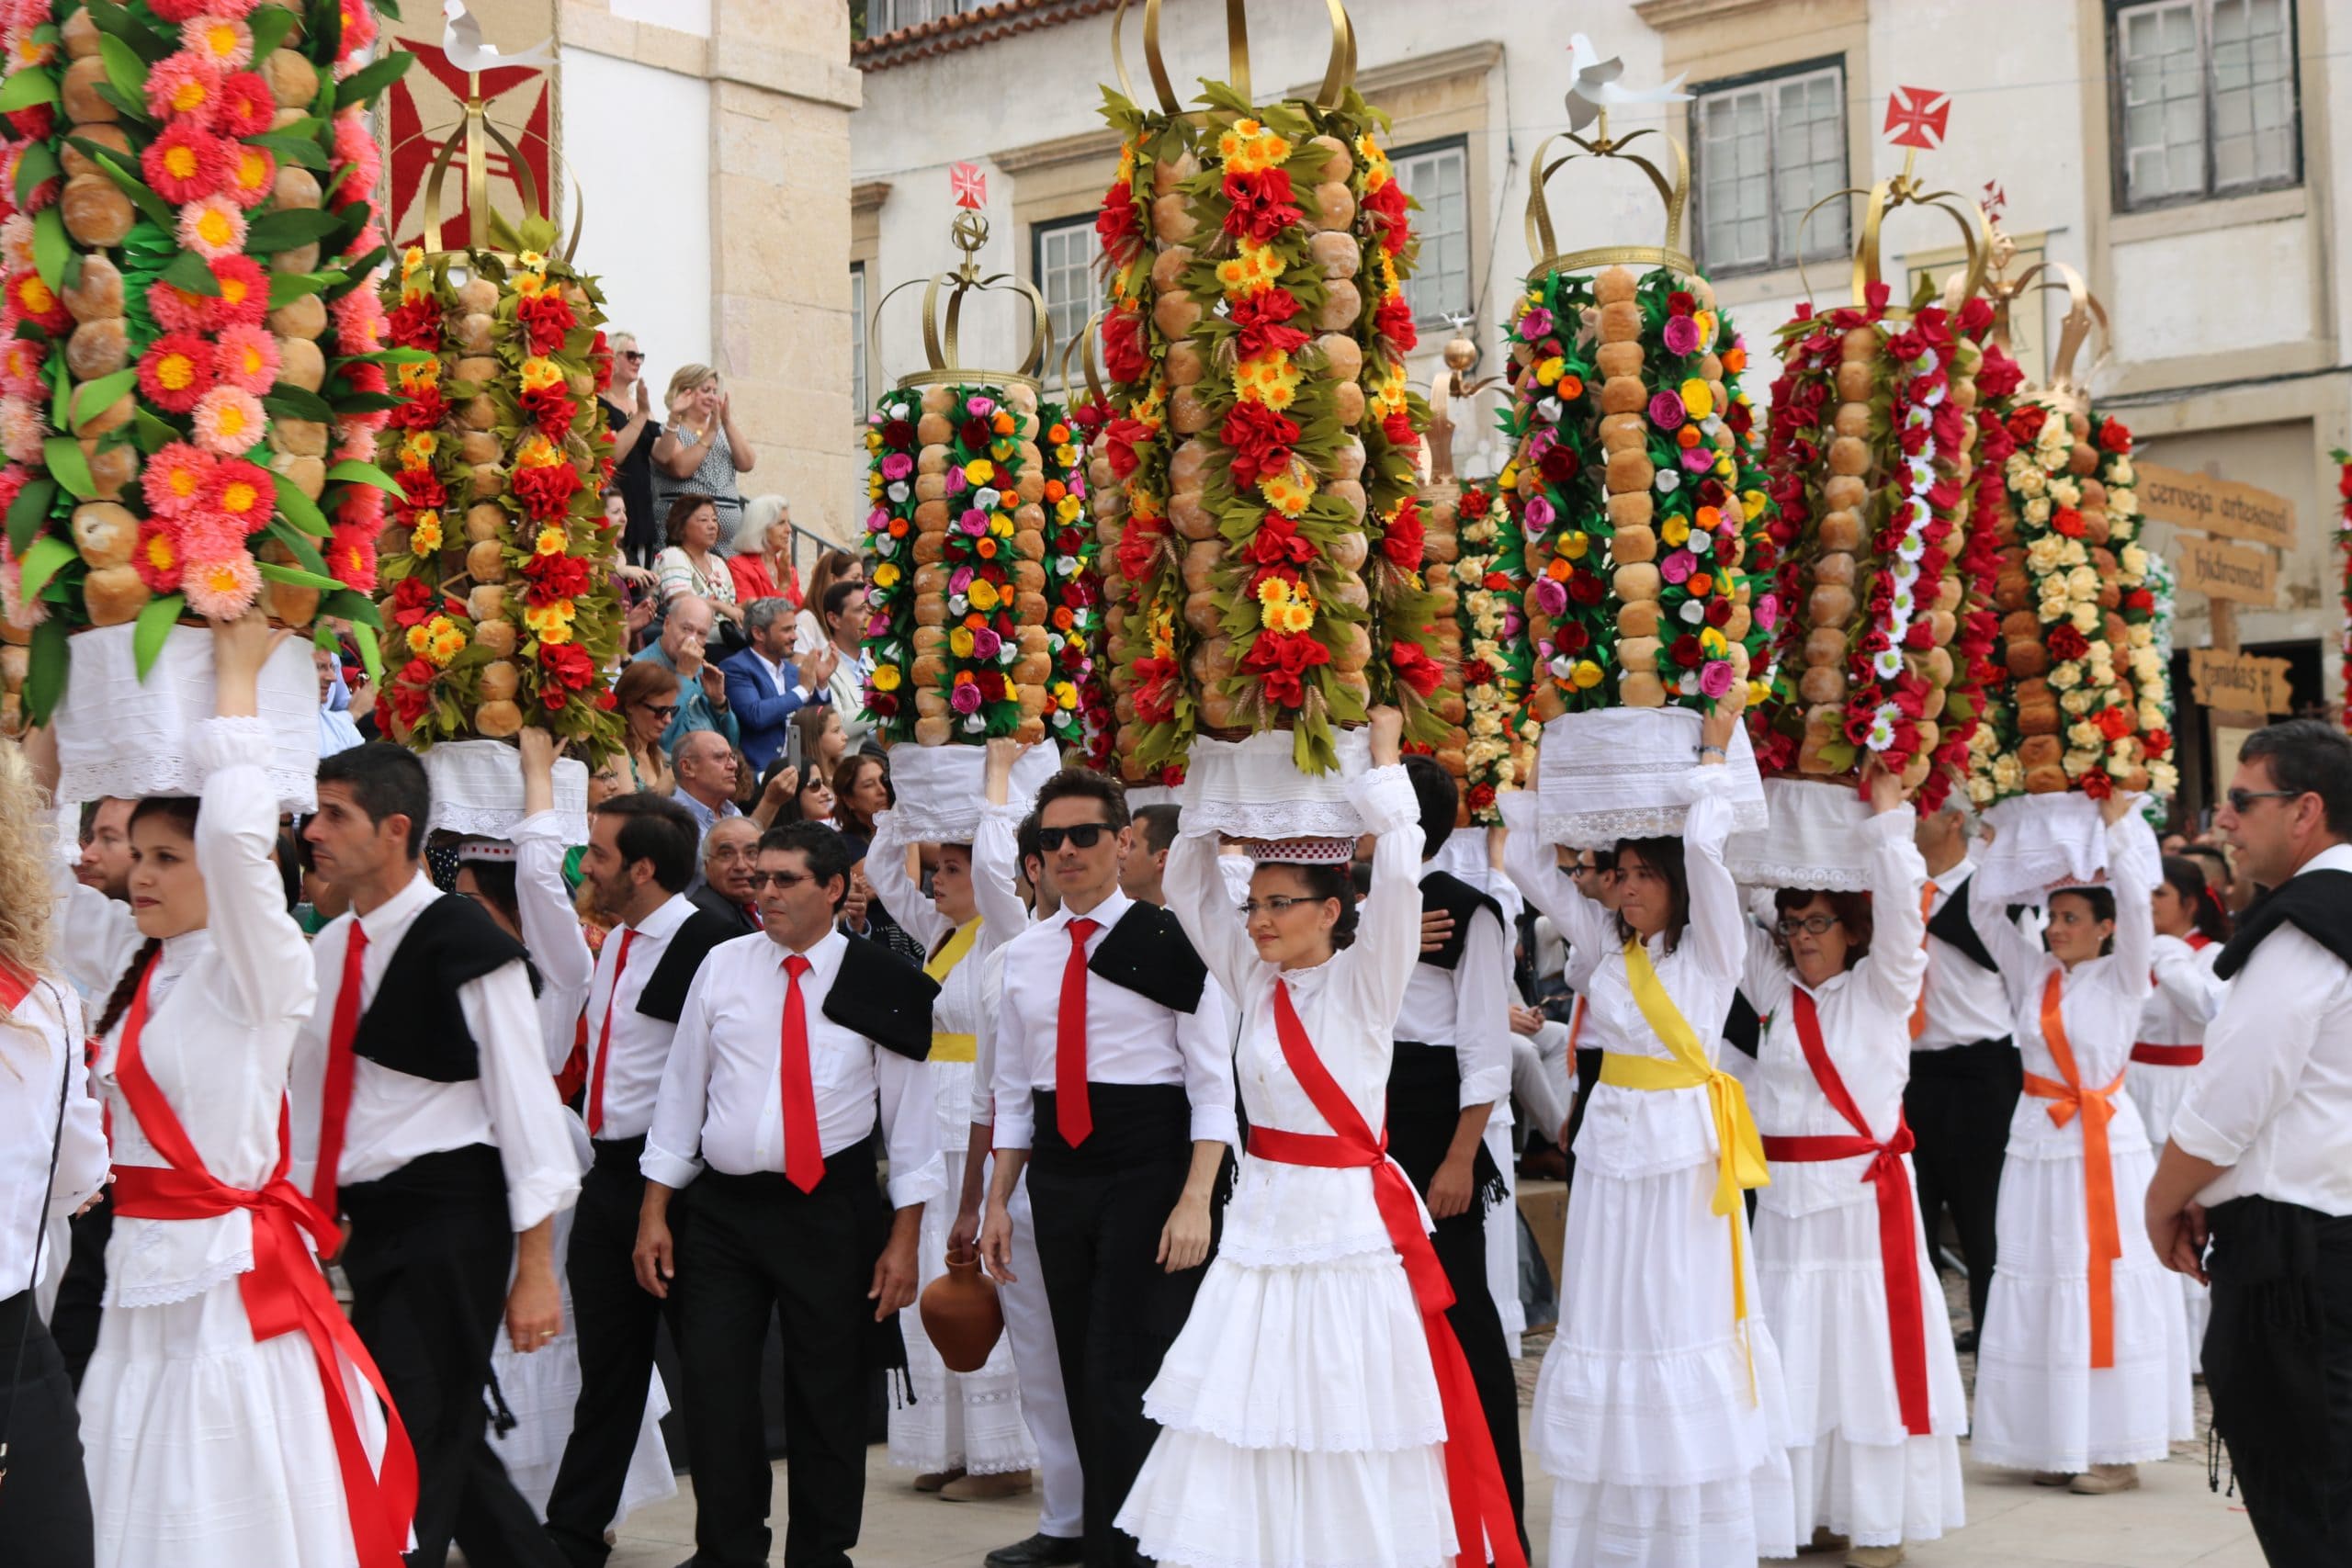 The origin and symbolism of the Festa dos Tabuleiros in Tomar